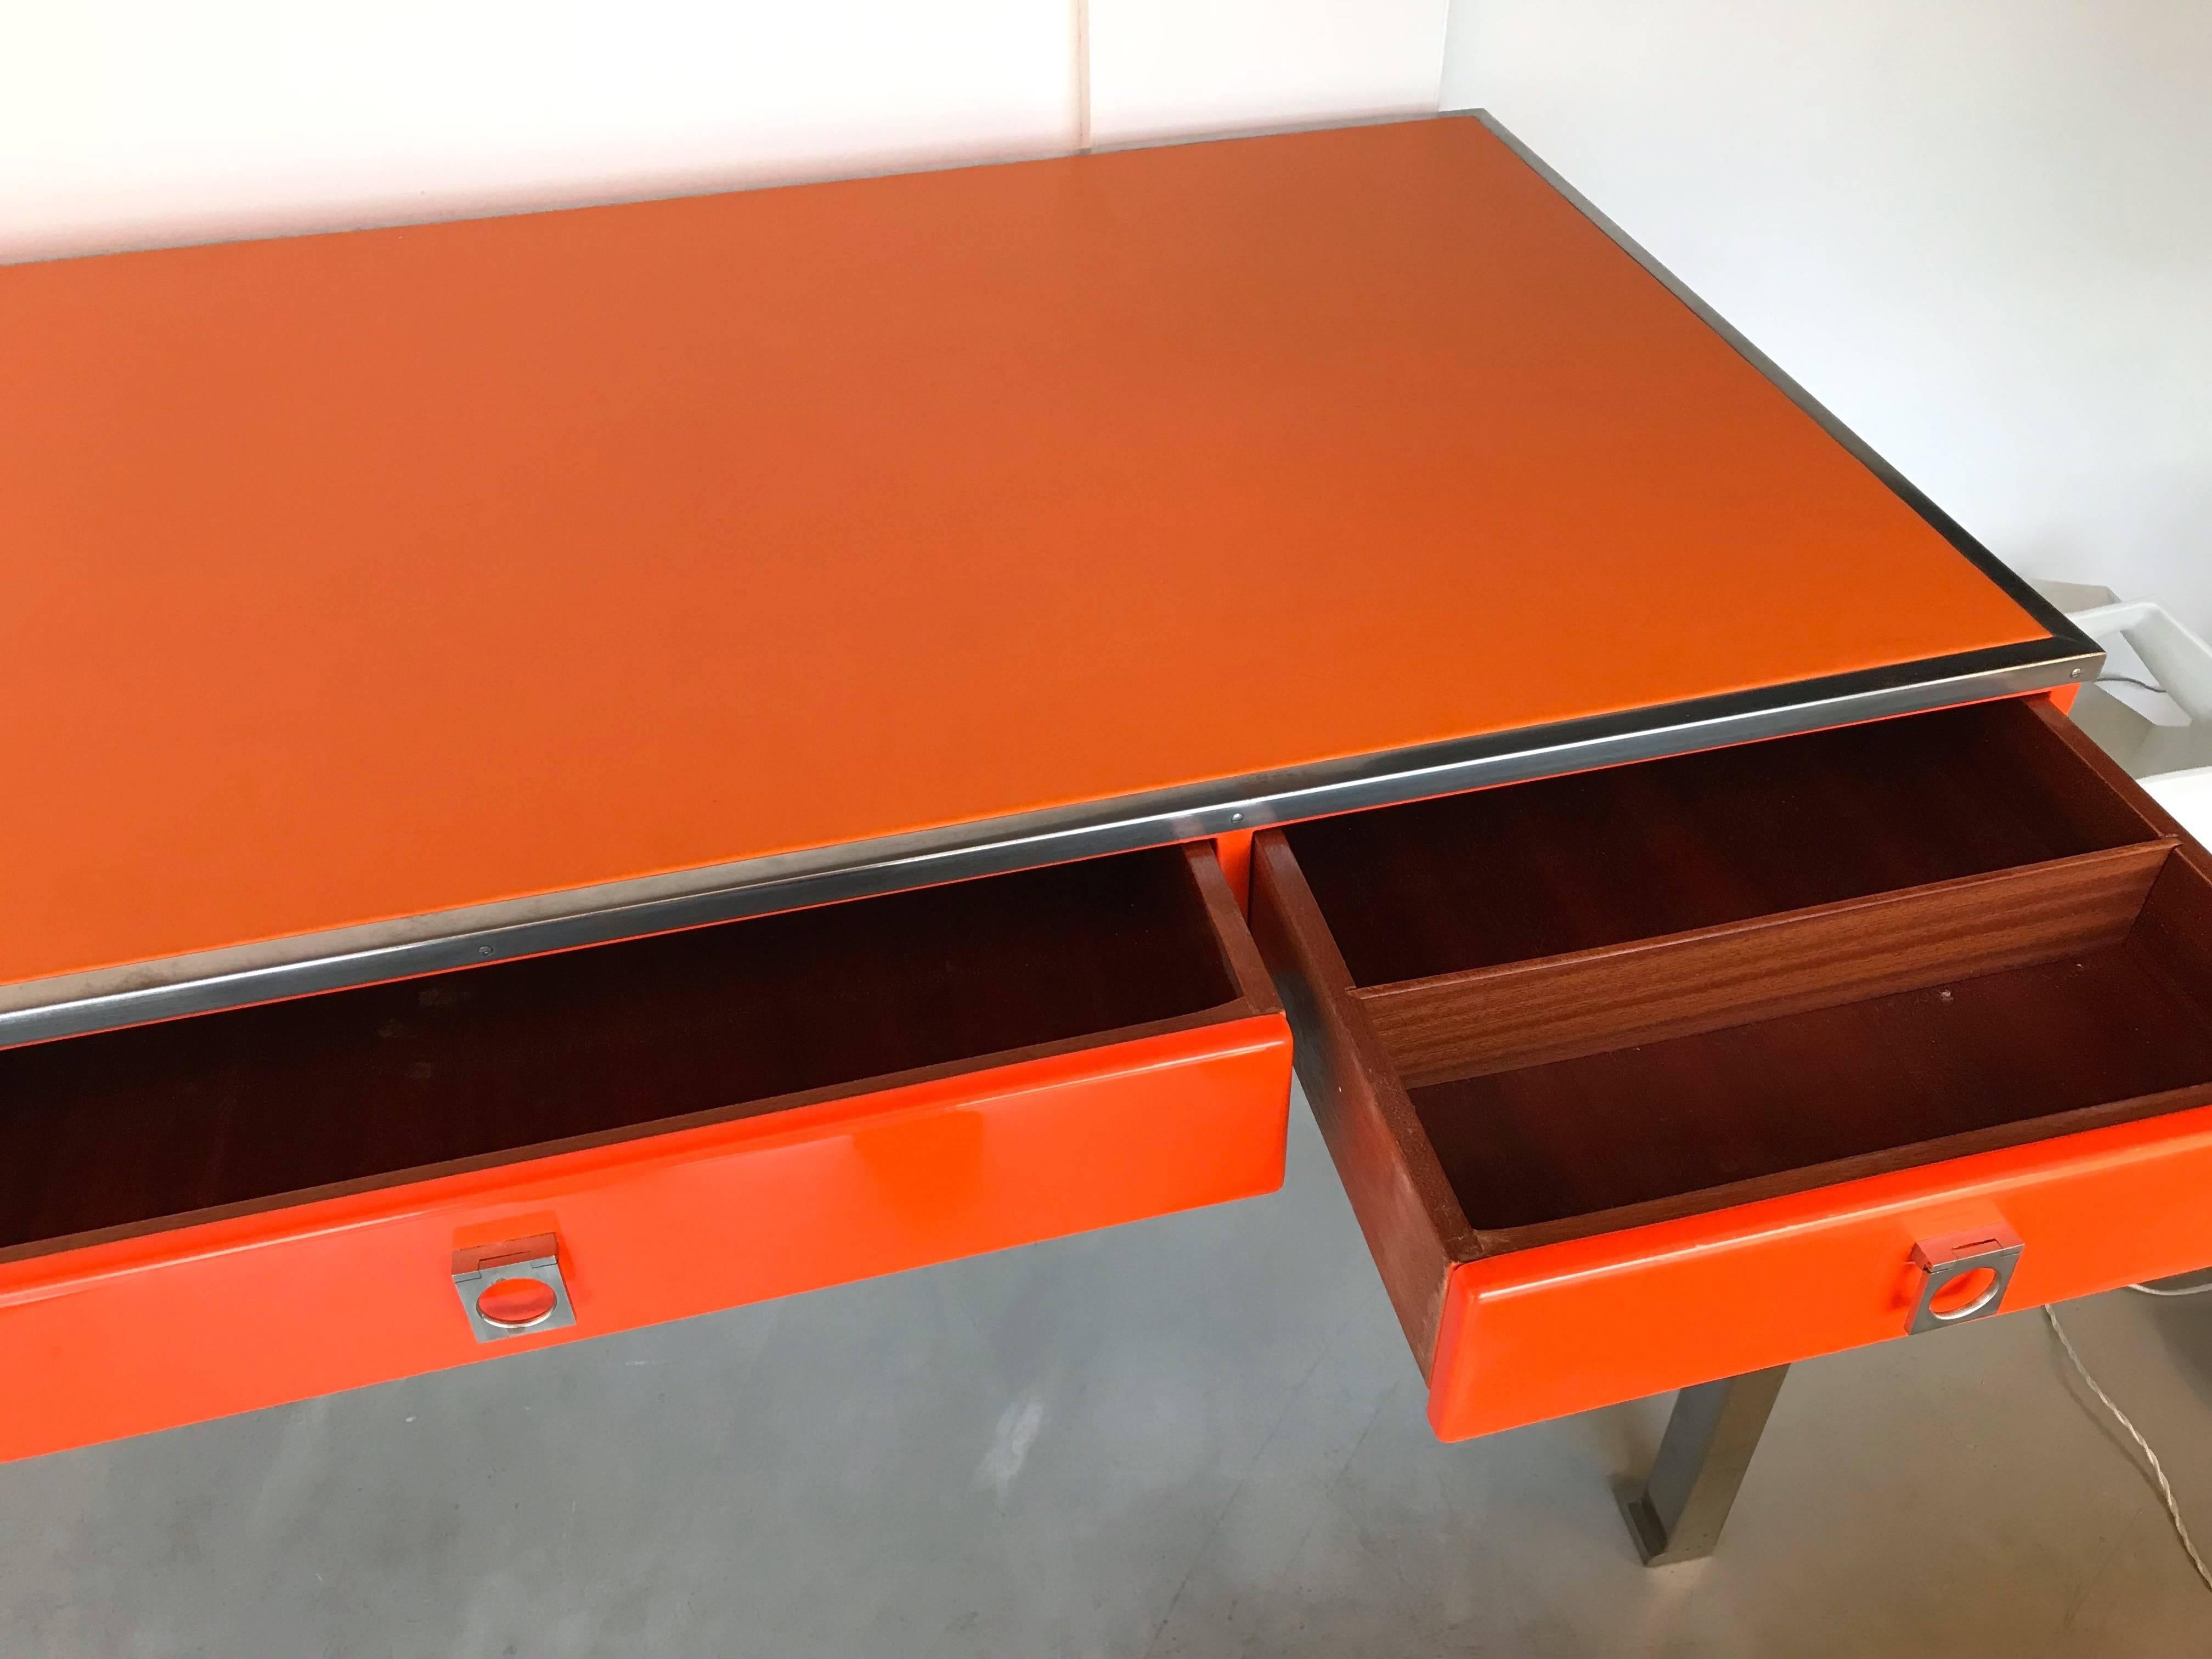 Orange lacquered desk writing or console table model 130 by the designer Guy Lefevre for Maison Jansen. Leather top, mahogany wood interior drawers, nickelled brass feet. Famous manufacture like Bagues, Jean Claude Mahey.